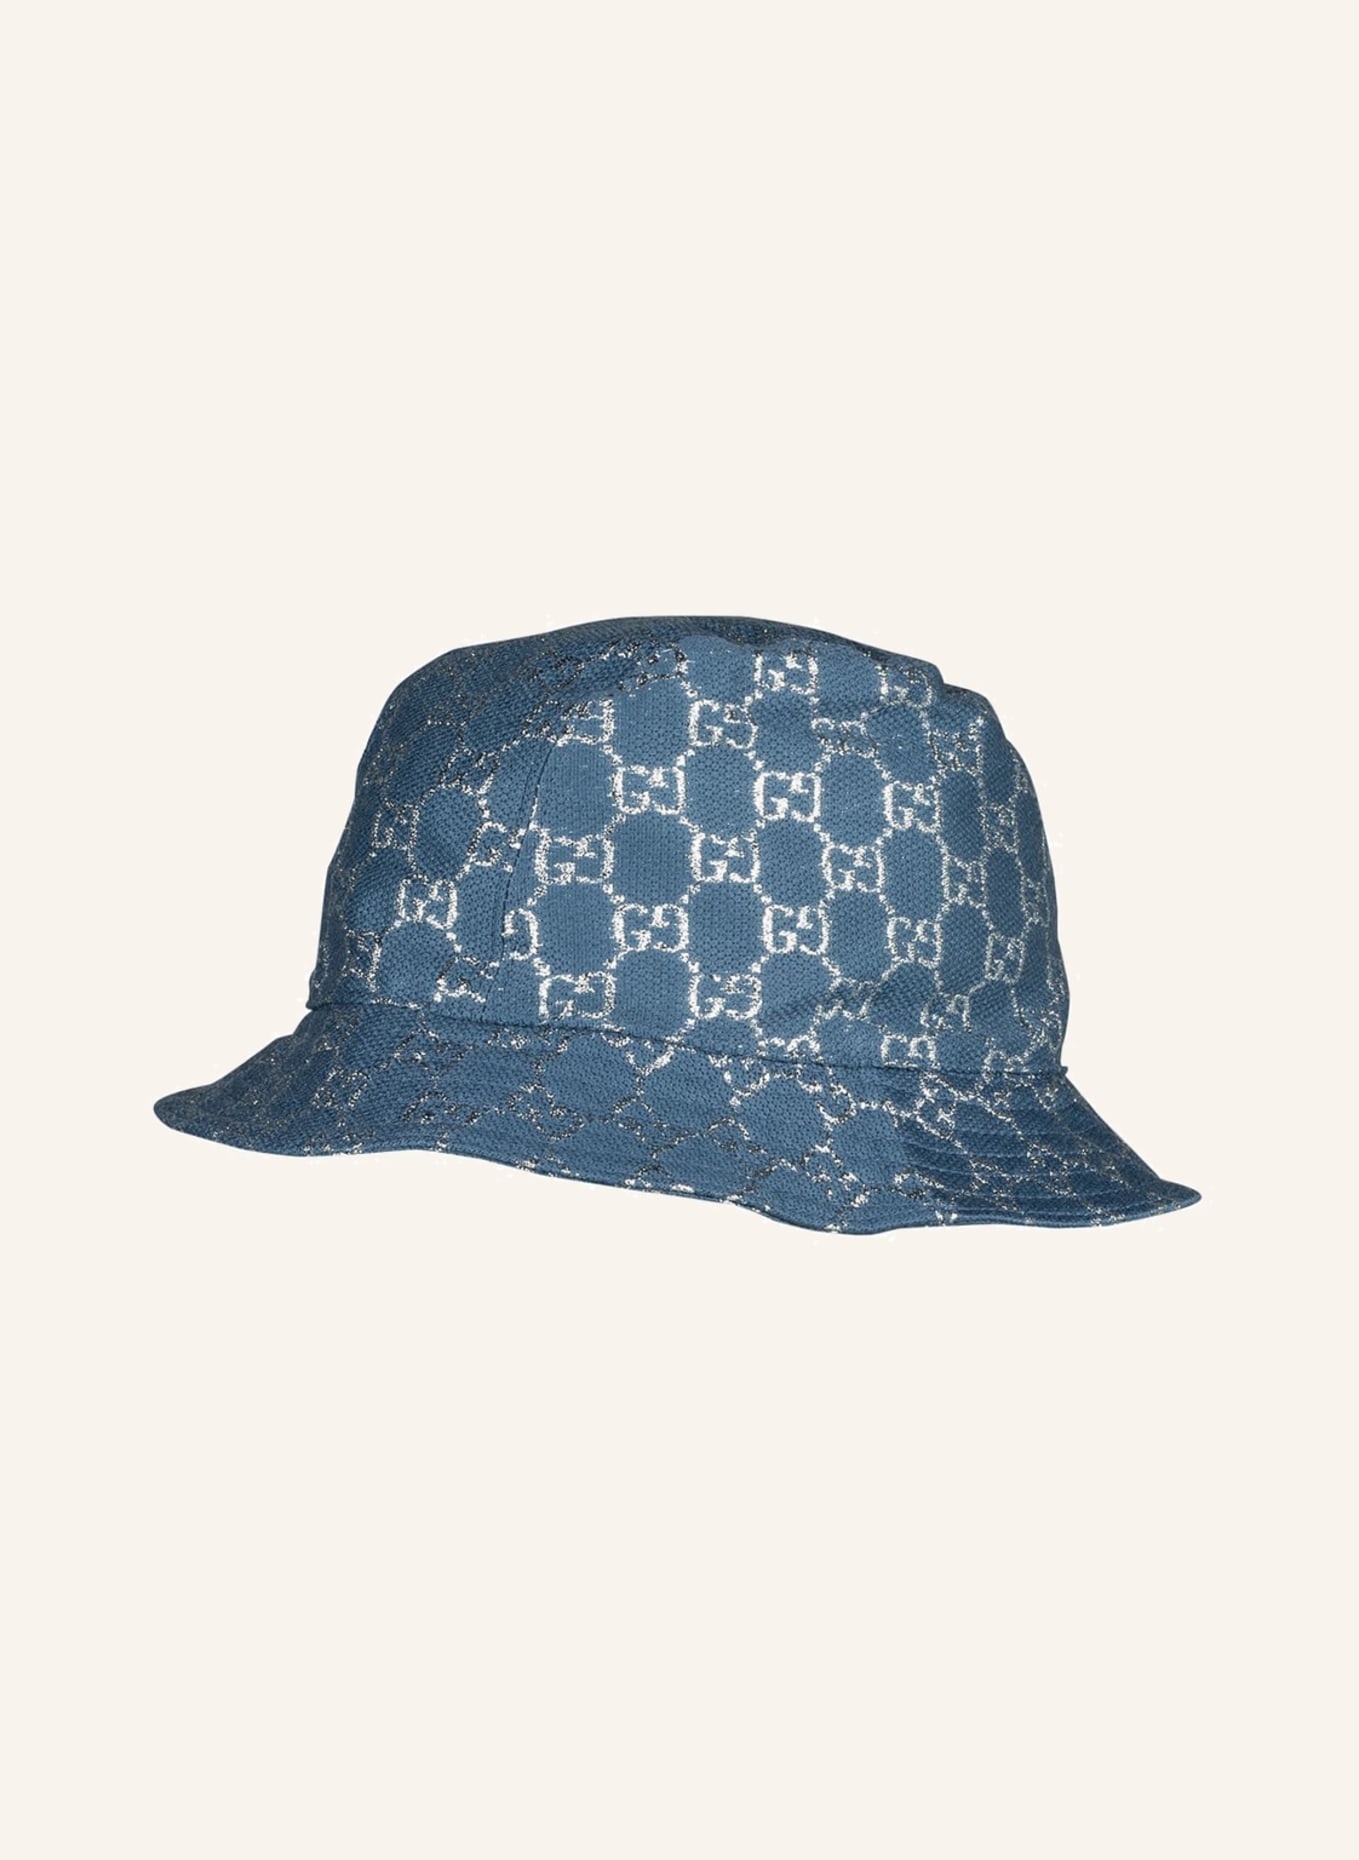 GUCCI Bucket hat in 4600 turquoise blue